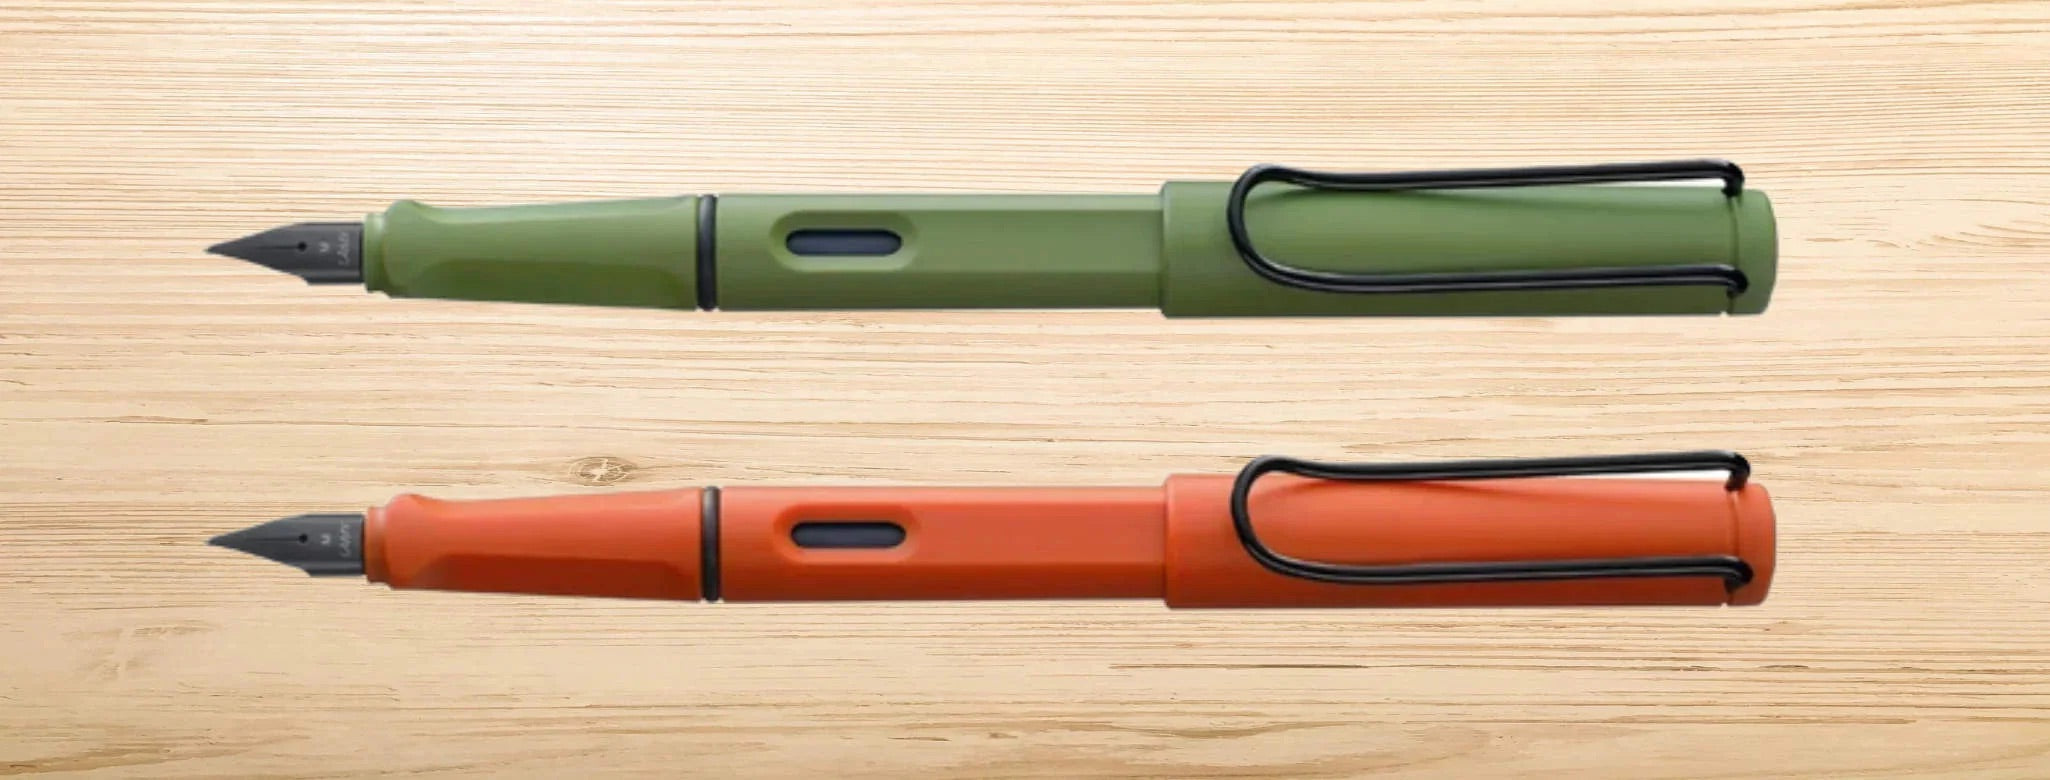 Looking Back at 10 Years of LAMY Special Edition Fountain Pens - 2020 - 2021 - Savannah and Terra